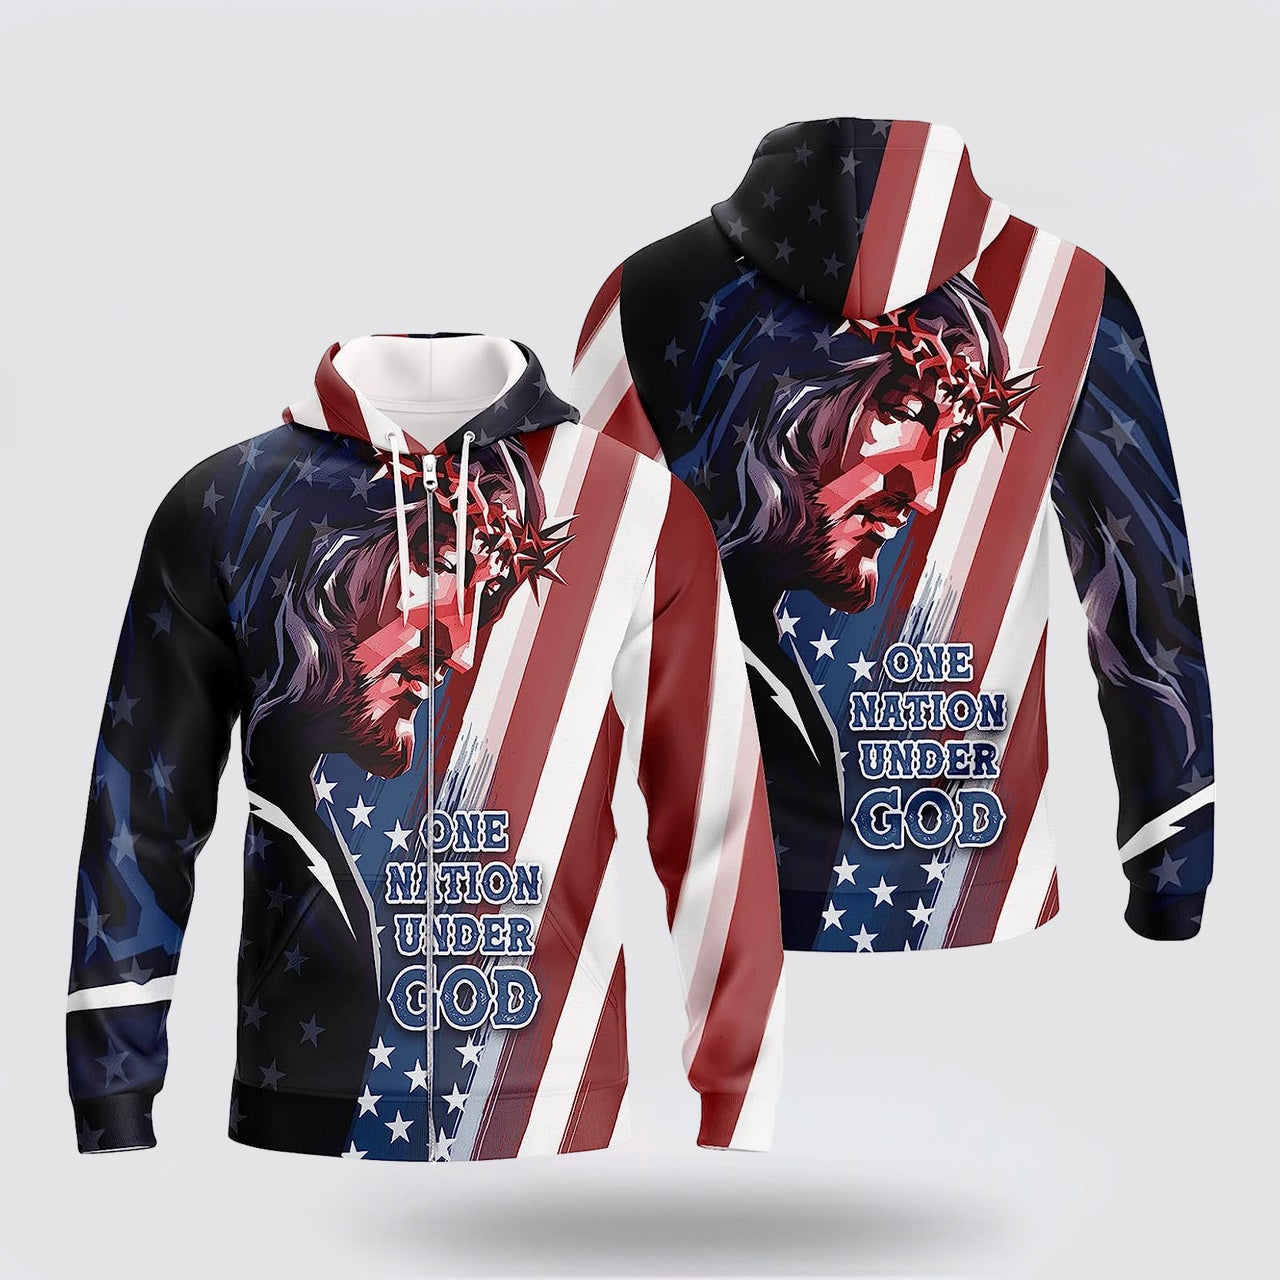 Jesus And American Flag One Nation Under God 3d Hoodies For Women Men - Christian Apparel Hoodies